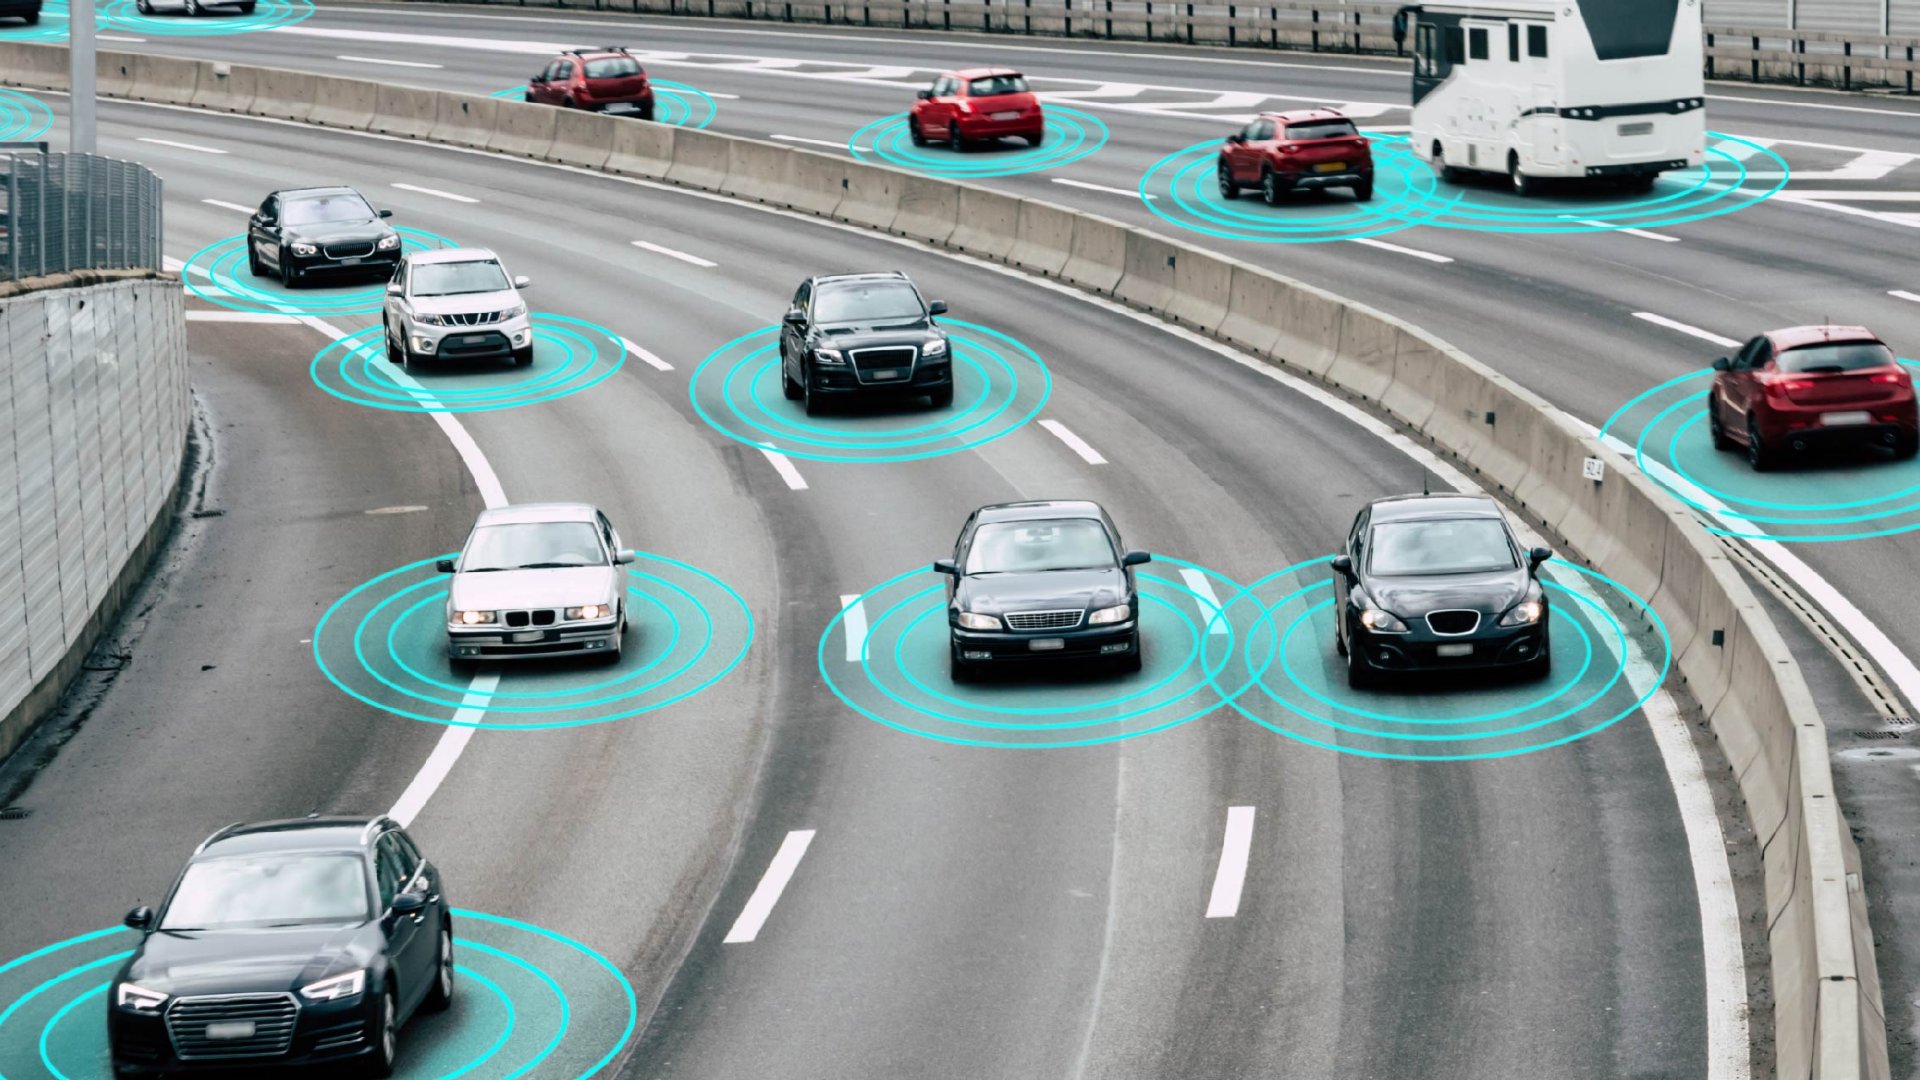 Cars on the highway connected with IoT sensors